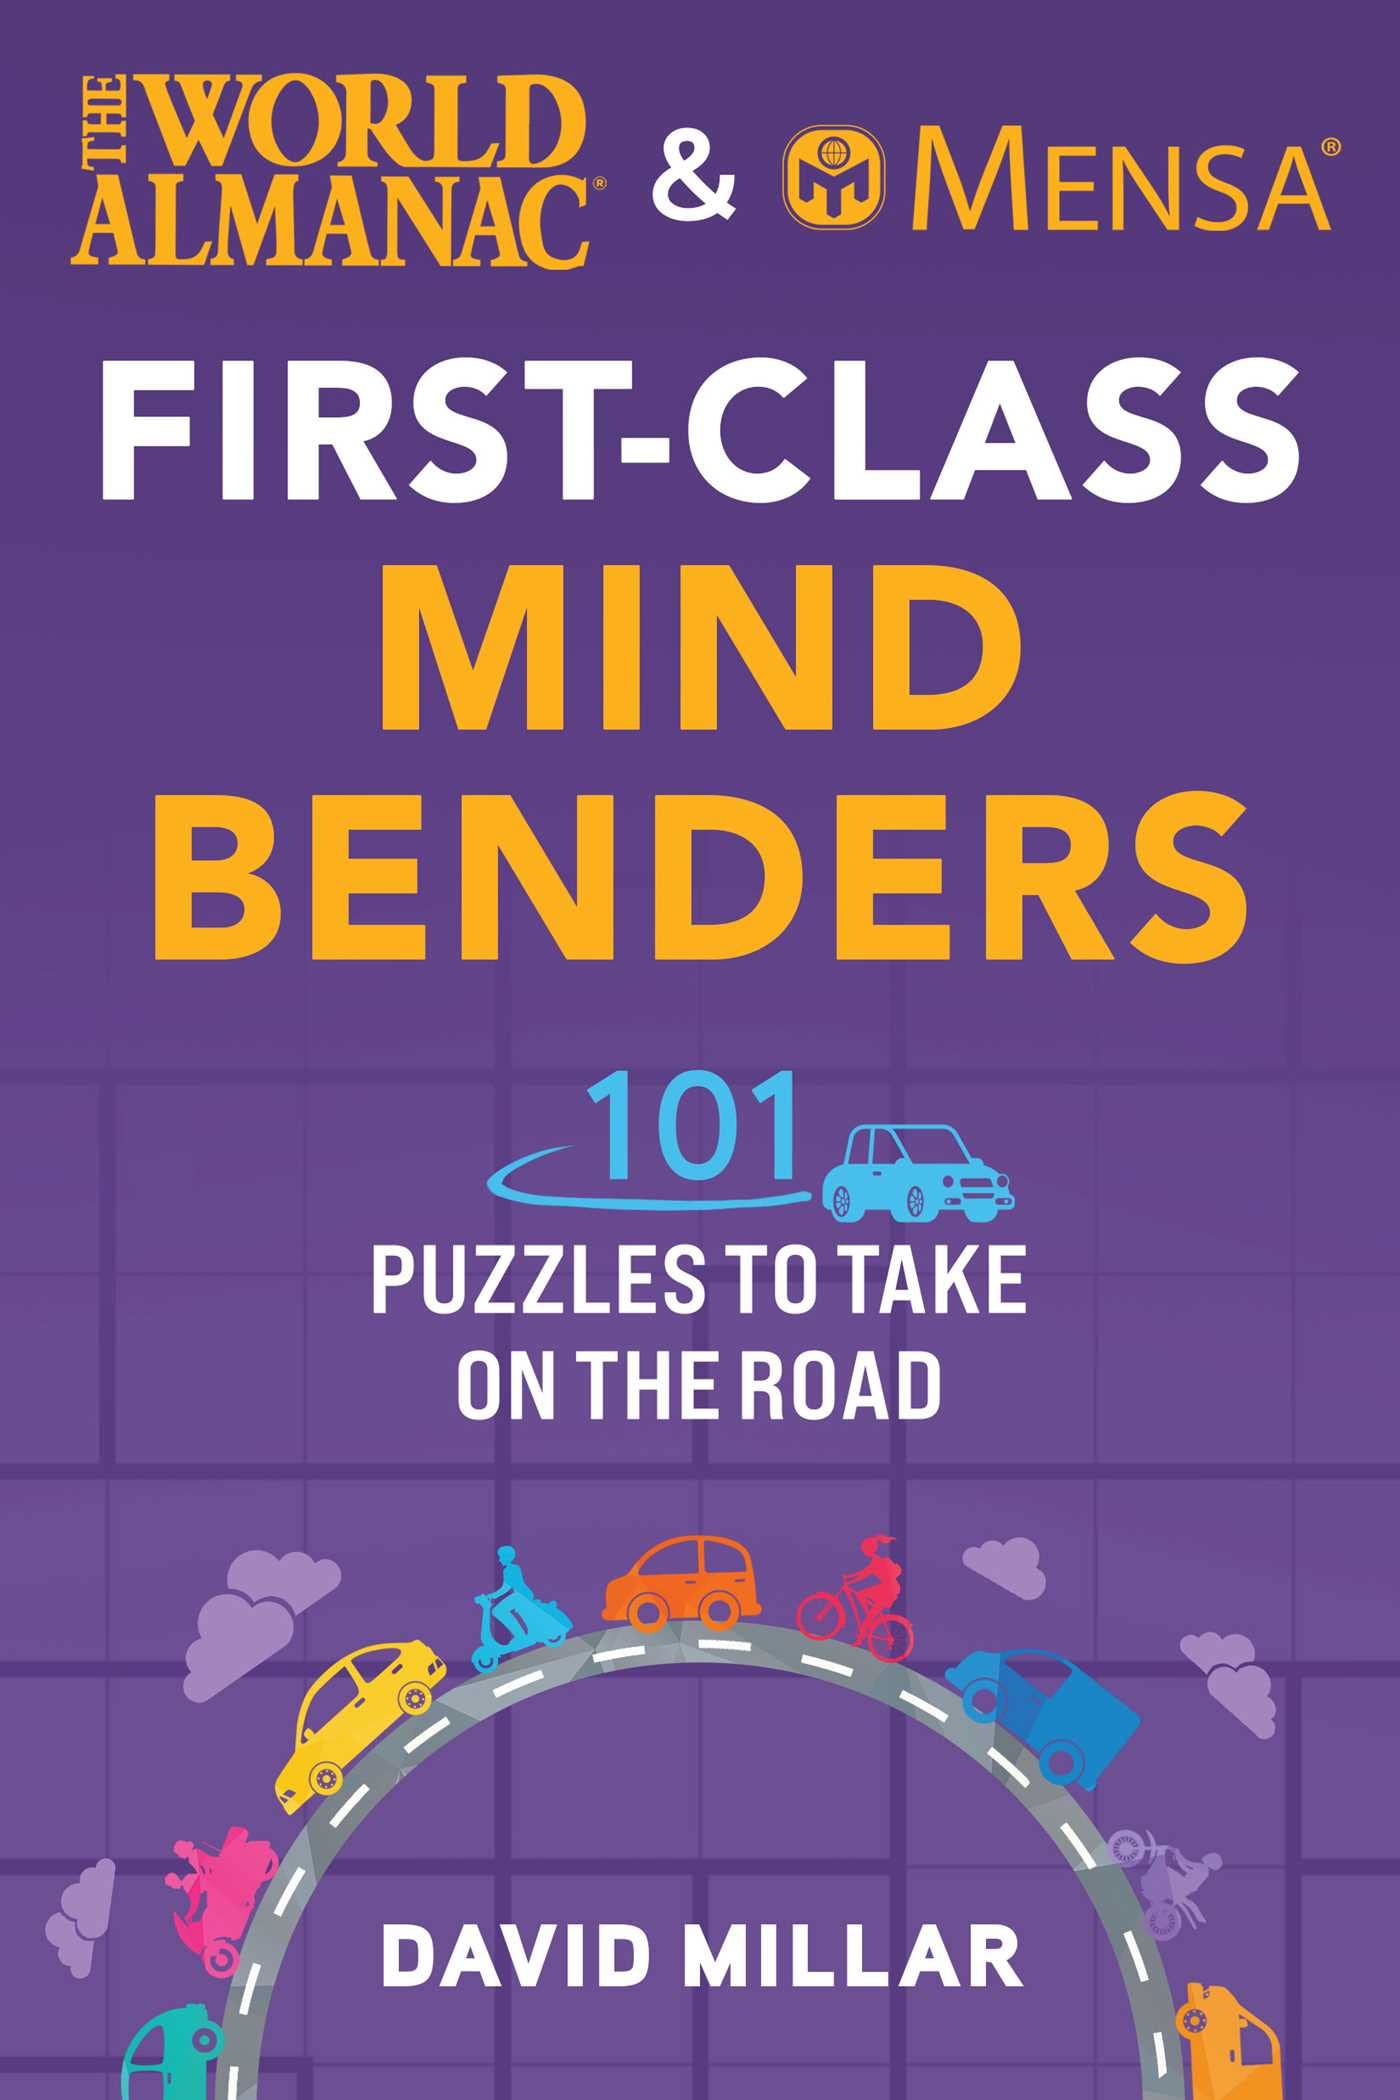 Cover of The World Almanac & Mensa First-Class Mind Benders by David Millar